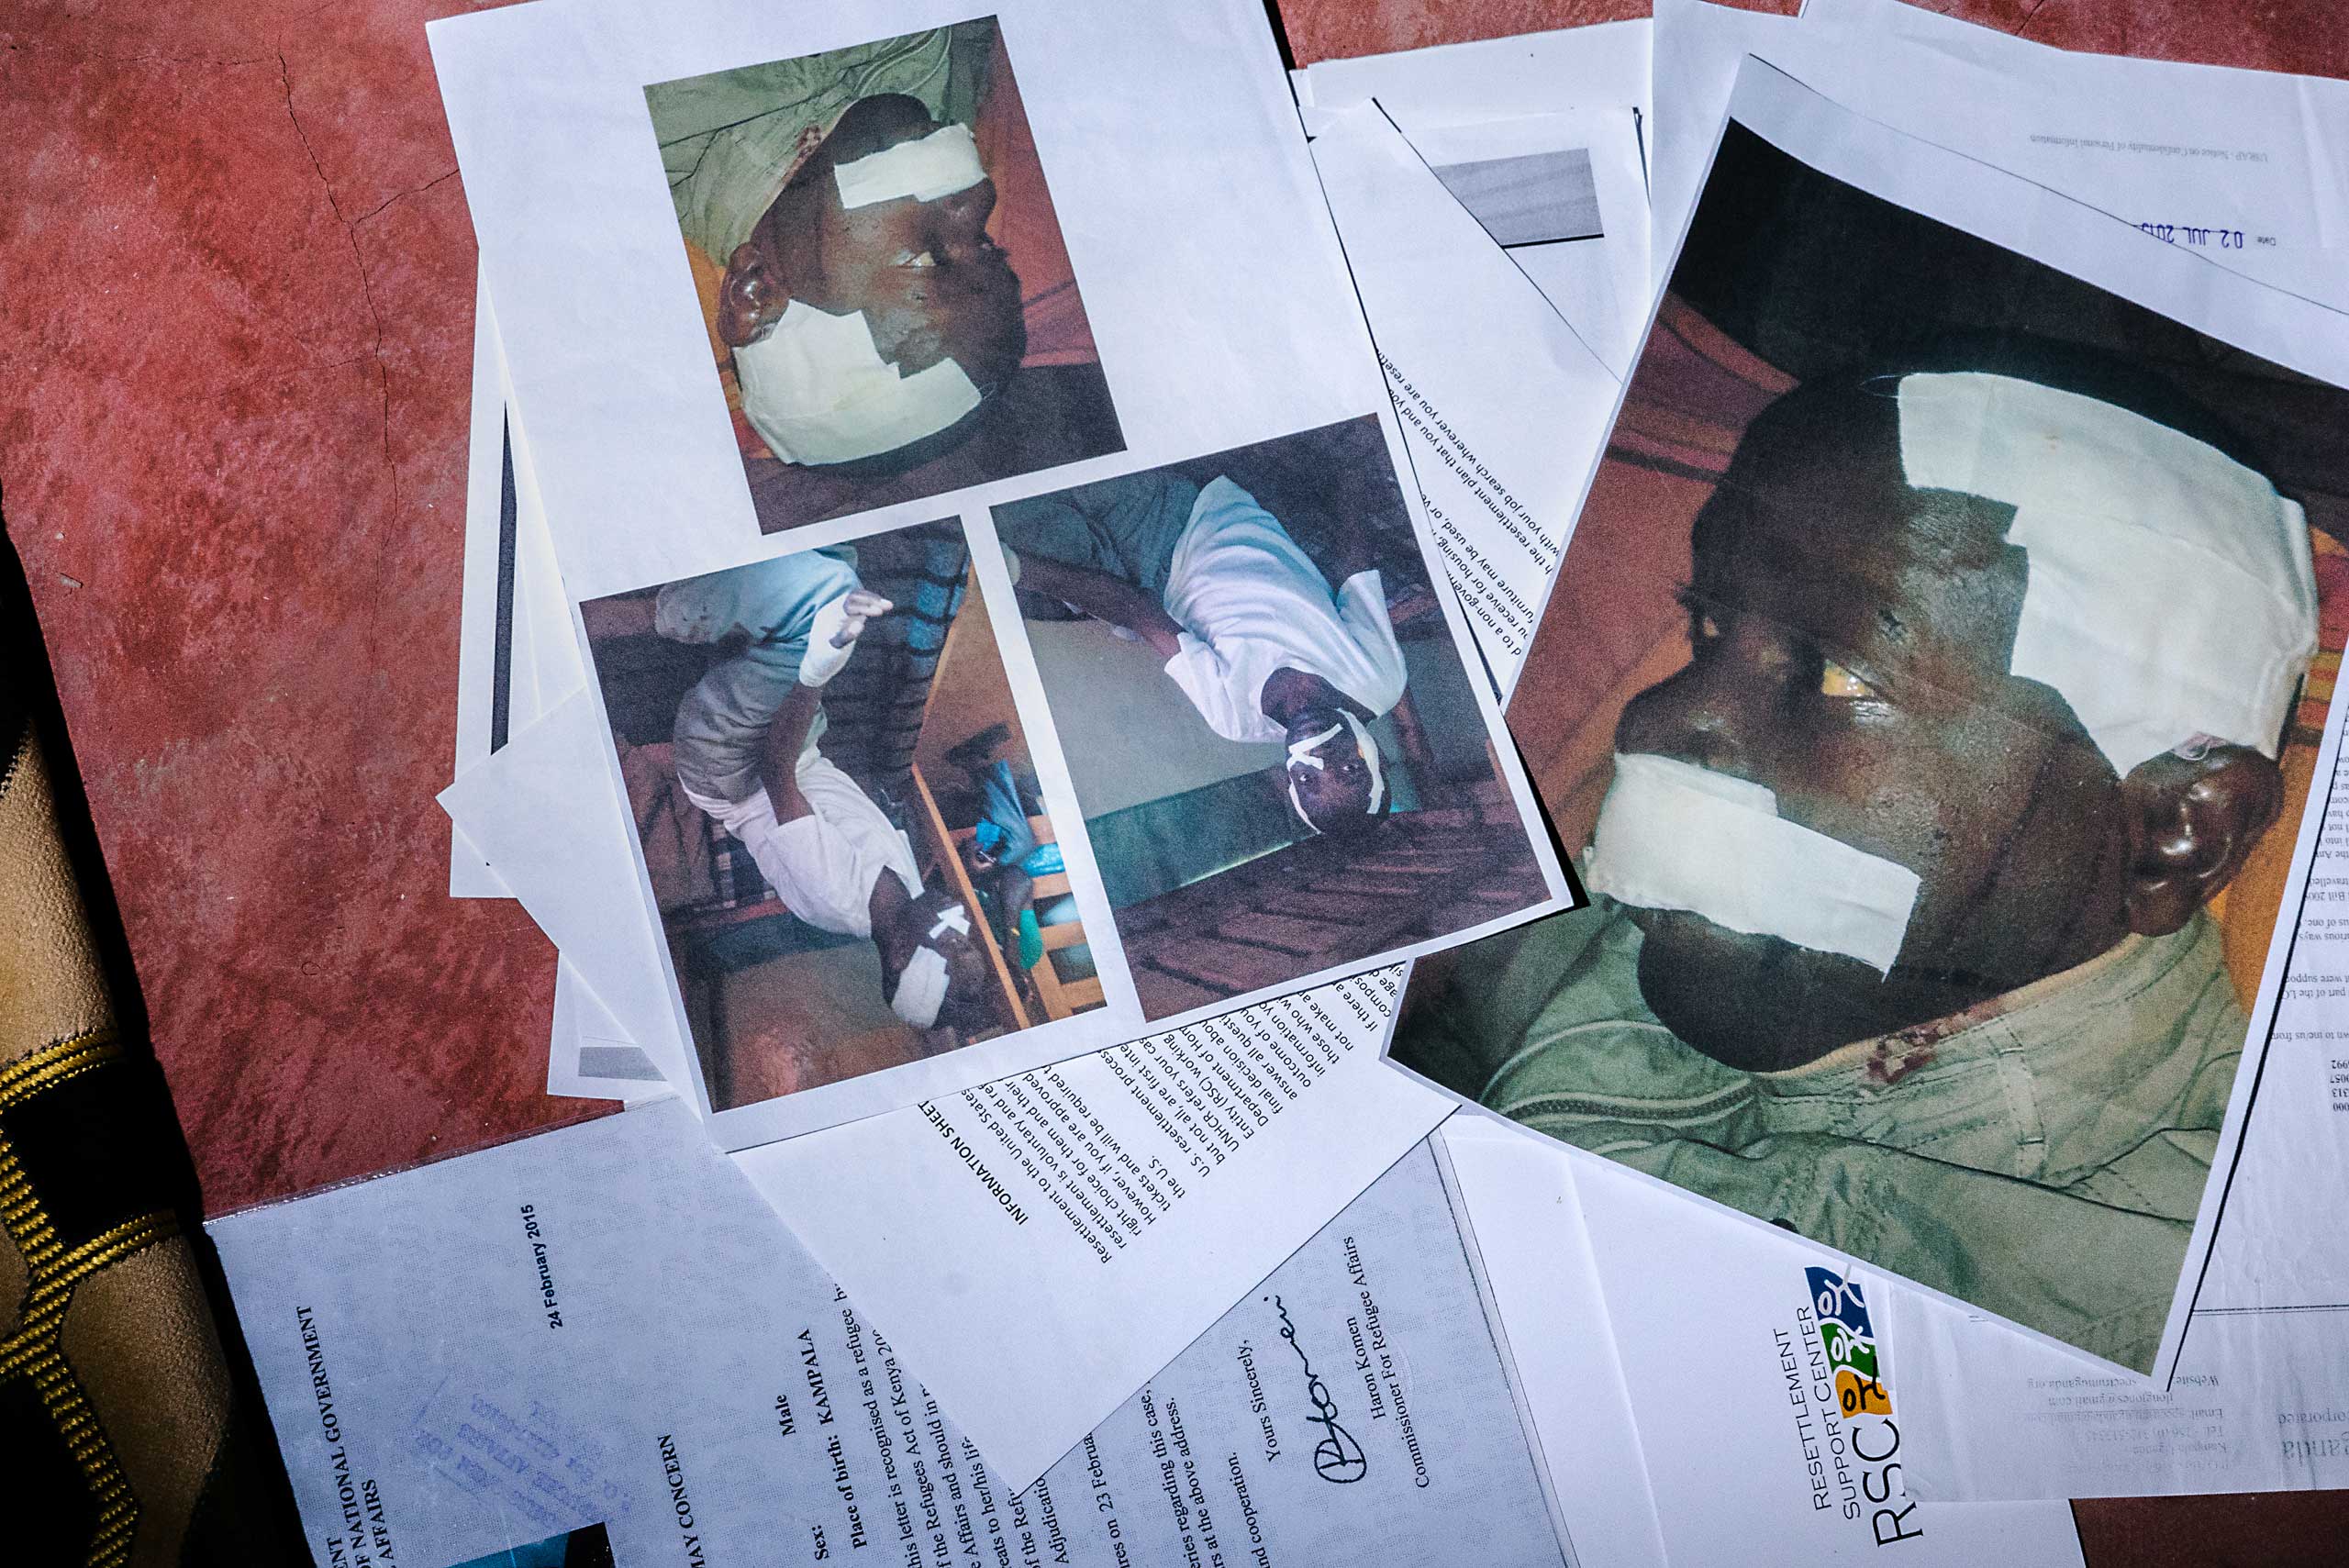 Soon after arriving in Kenya, S. says he was attacked by seven men with machetes. Here, evidence of his attack that he submitted as part of his resettlement application. He has since been resettled in the U.S.